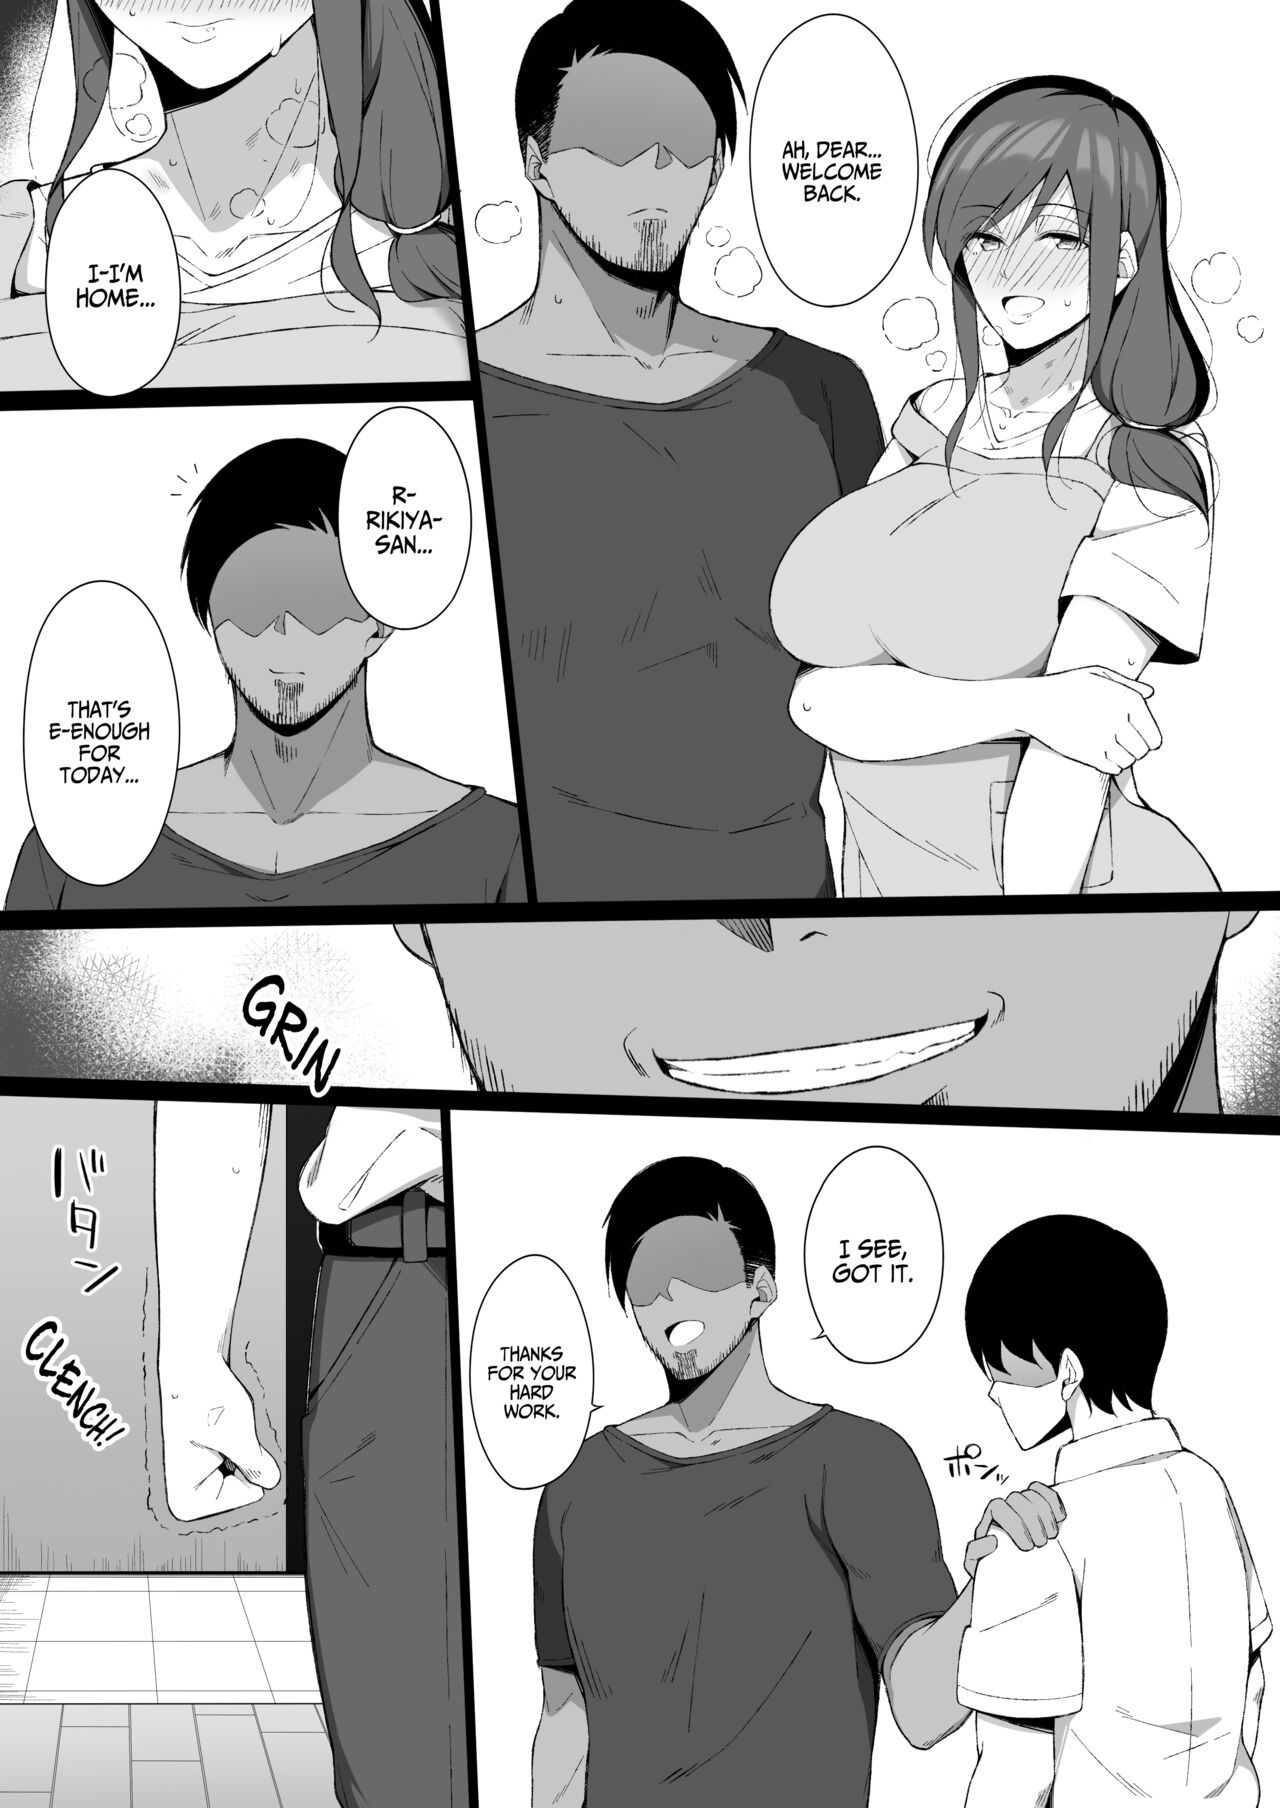 Degeneracy Of A Neat Housewife For A Man Porn Comic english 21